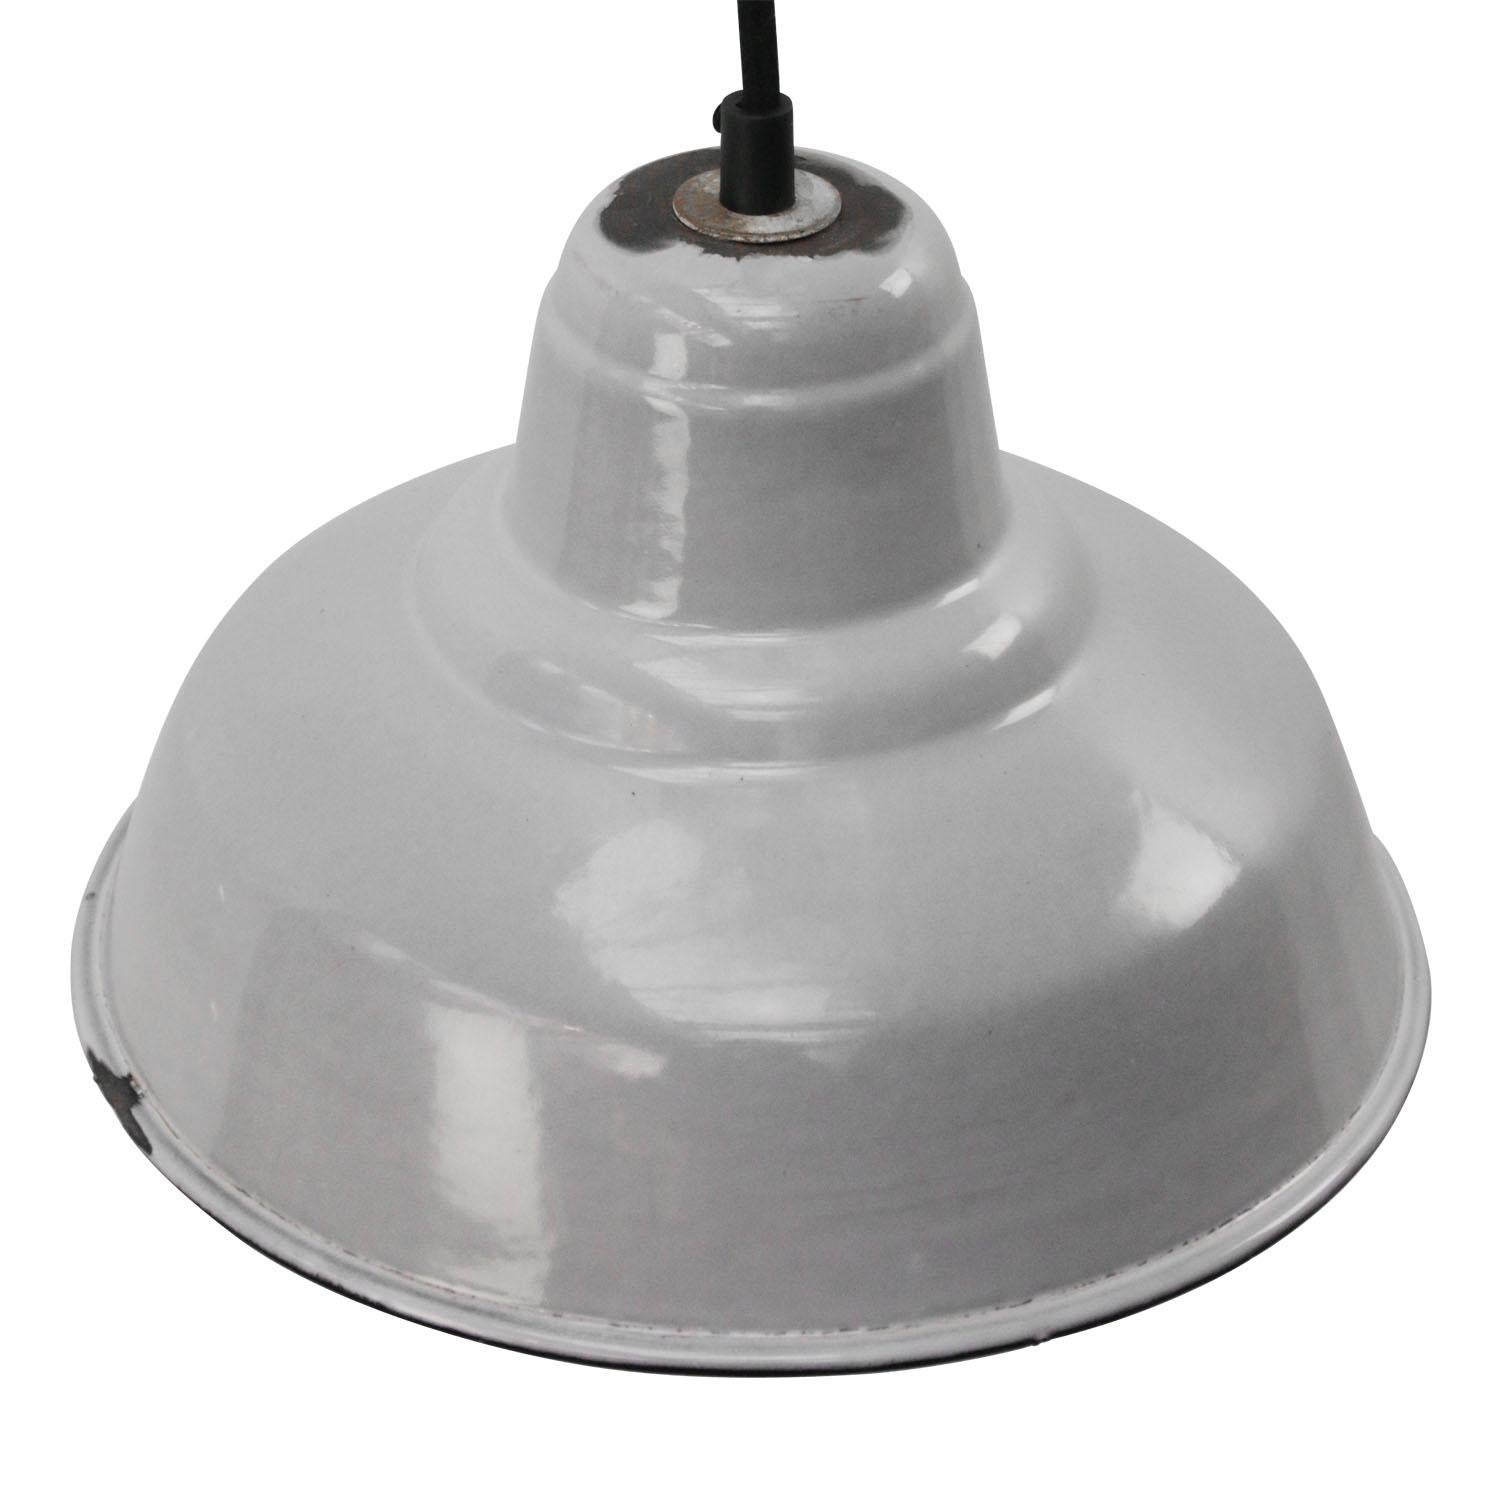 Dutch Industrial hanging lamp. Gray enamel white interior.

Weight: 0.95 kg / 2.1 lb

Priced per individual item. All lamps have been made suitable by international standards for incandescent light bulbs, energy-efficient and LED bulbs. E26/E27